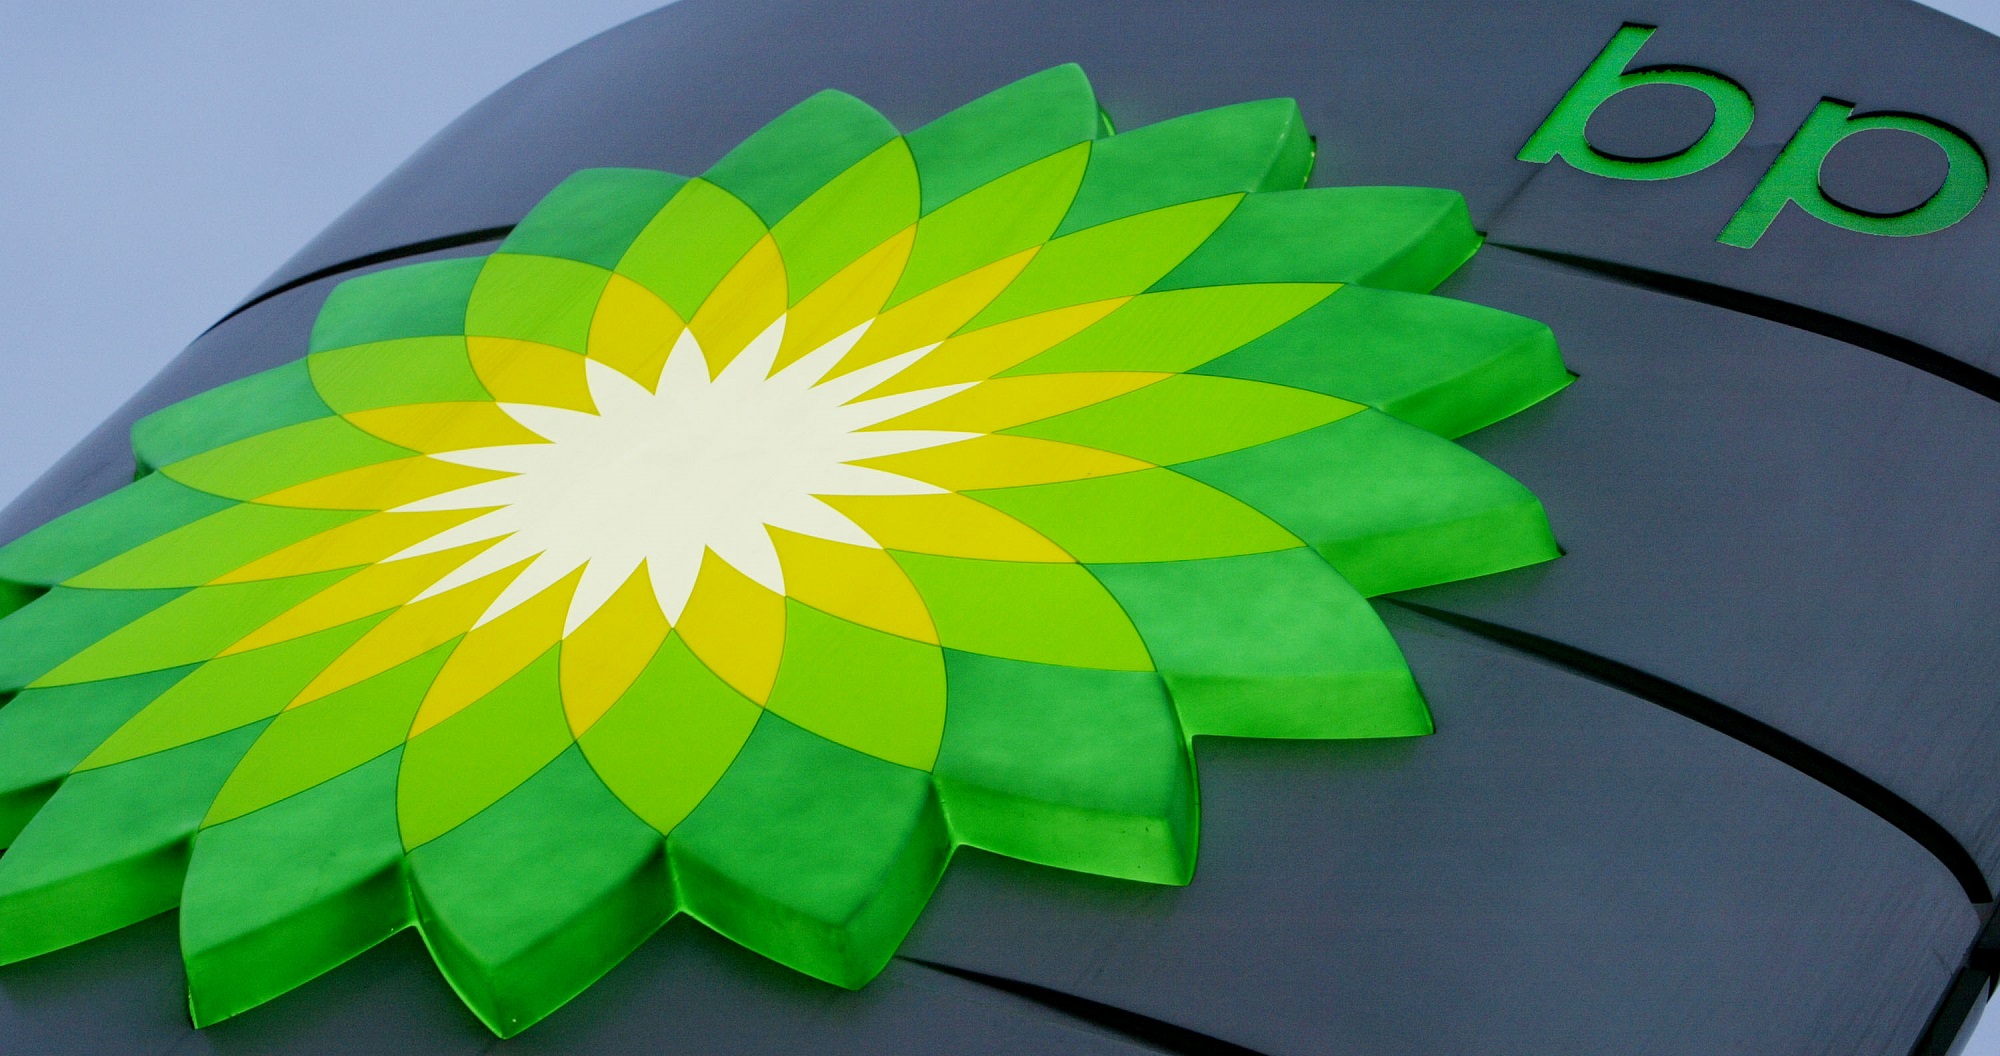 Minister told BP it is “key stakeholder” in climate summit - Unearthed